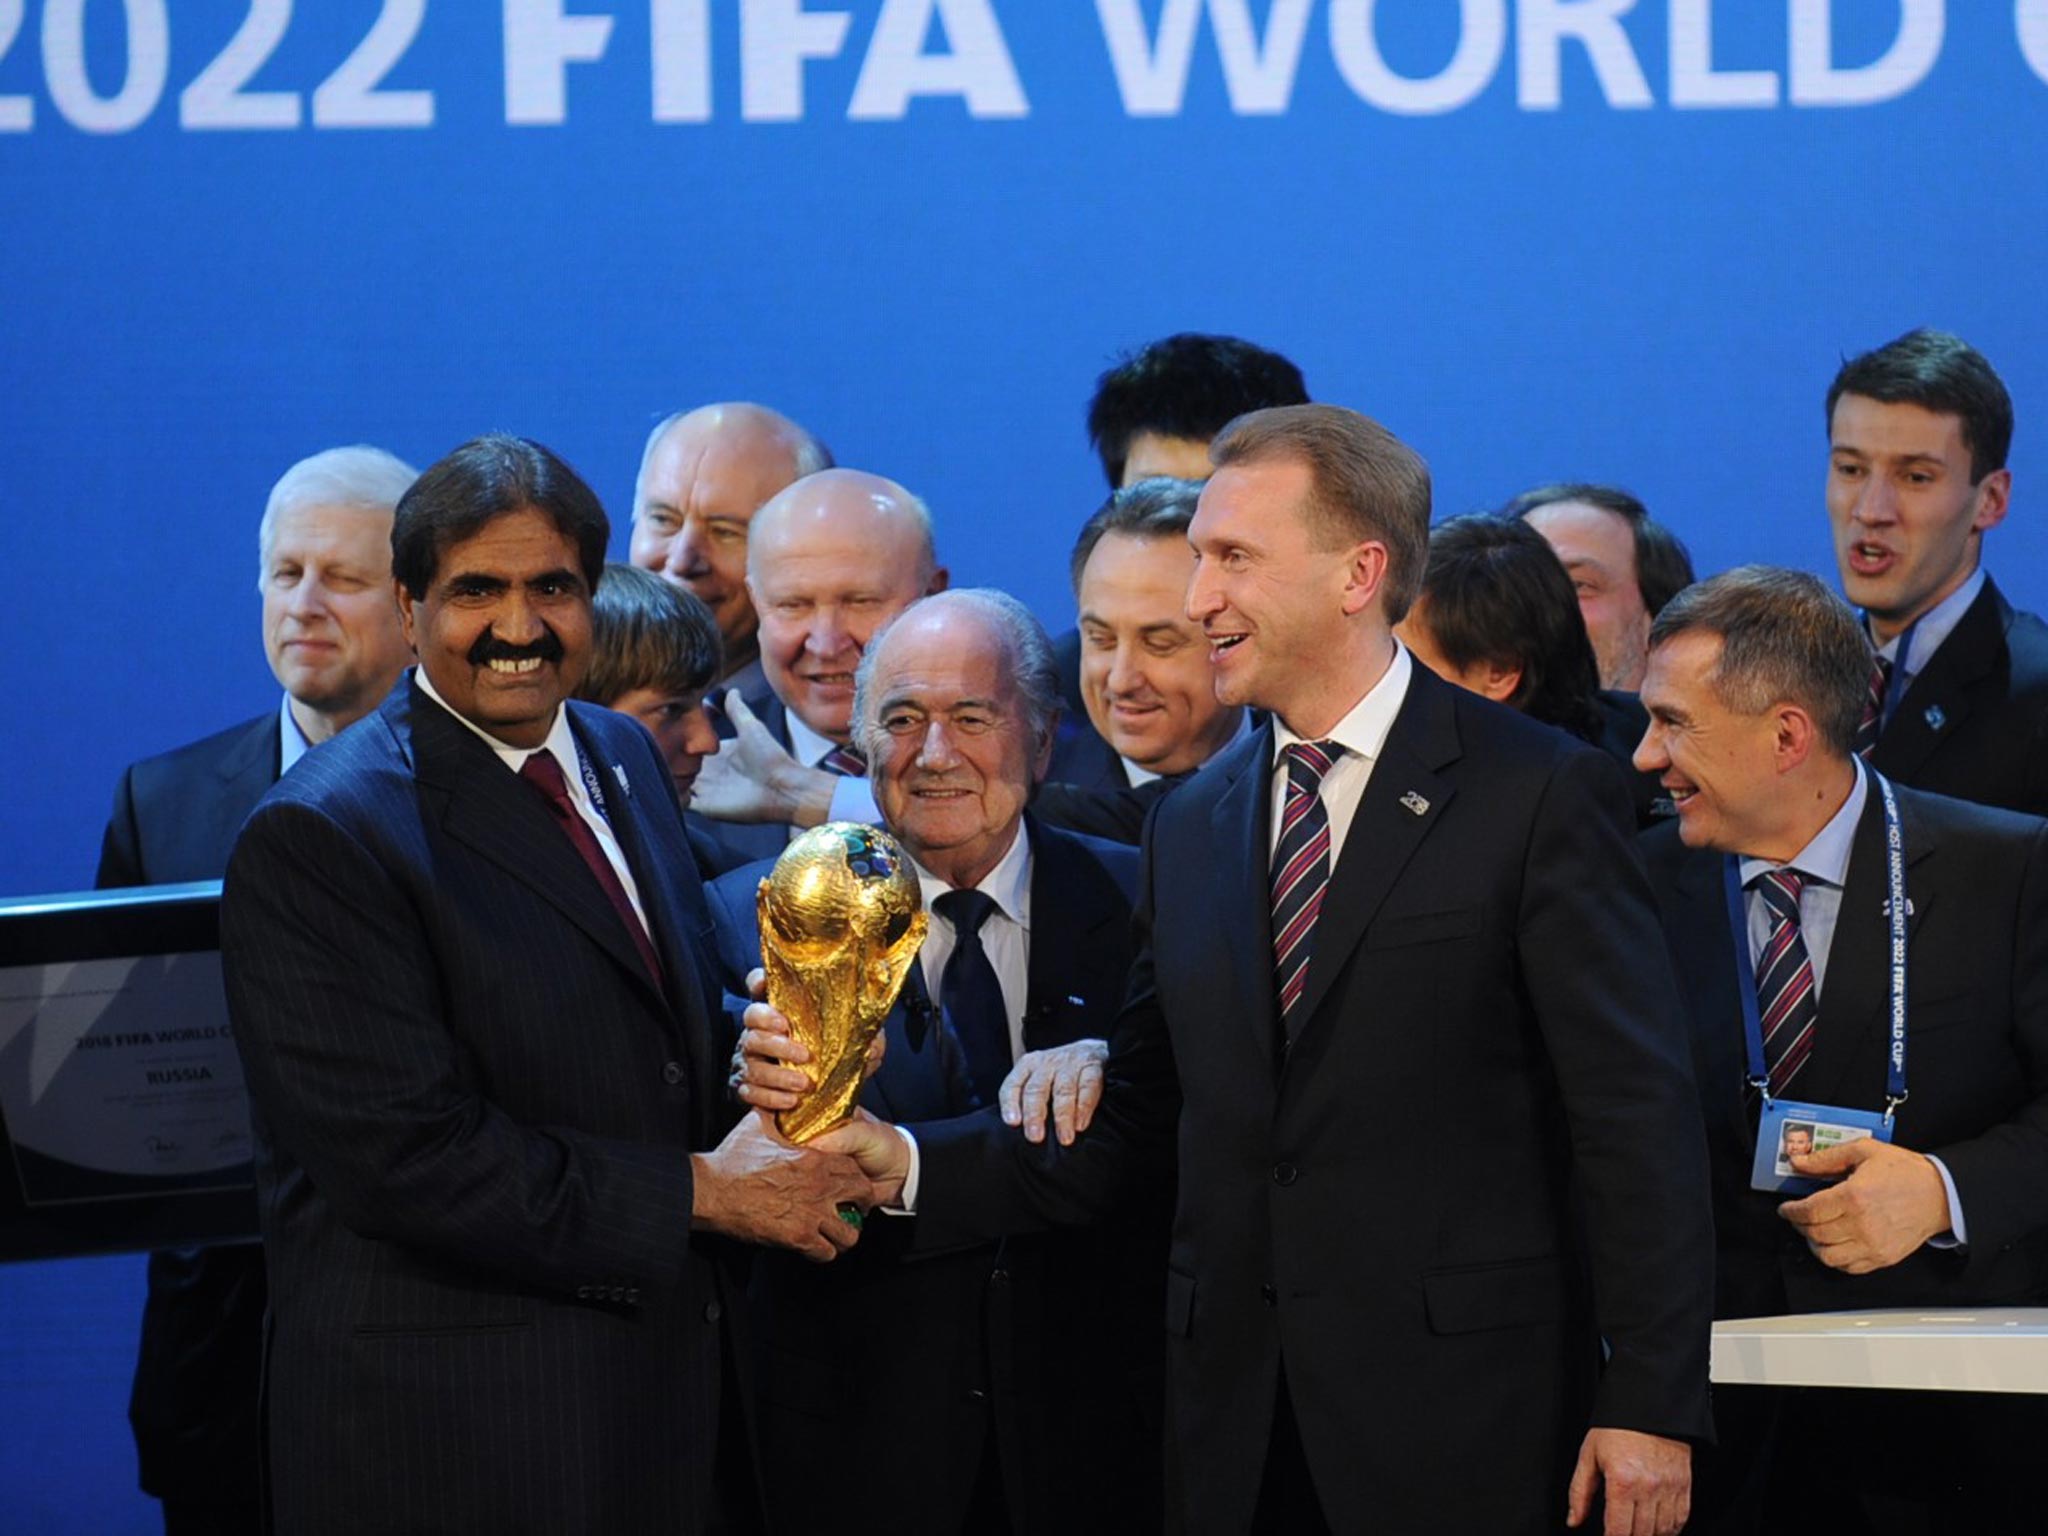 Sony are the first of Fifa's official partners to make statement on corruption allegations